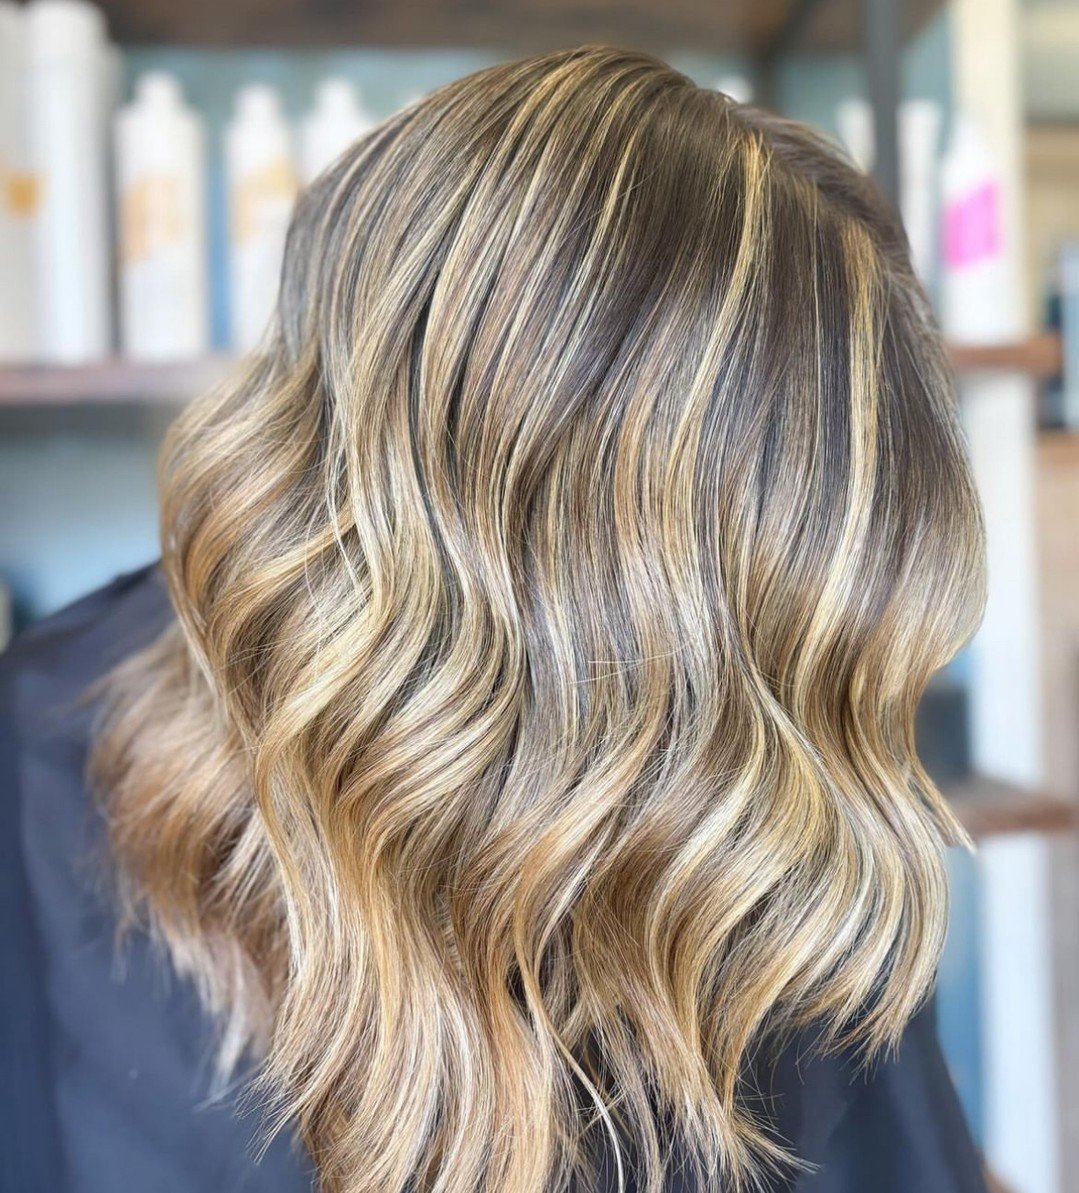 If you've been feeling blah about your hair, dimension is what you need!

Dimension is created with highlights, lowlights &amp; balayage. It helps bring out your beautiful natural color and isn't flat.

So if you've been feeling a bit blah about your